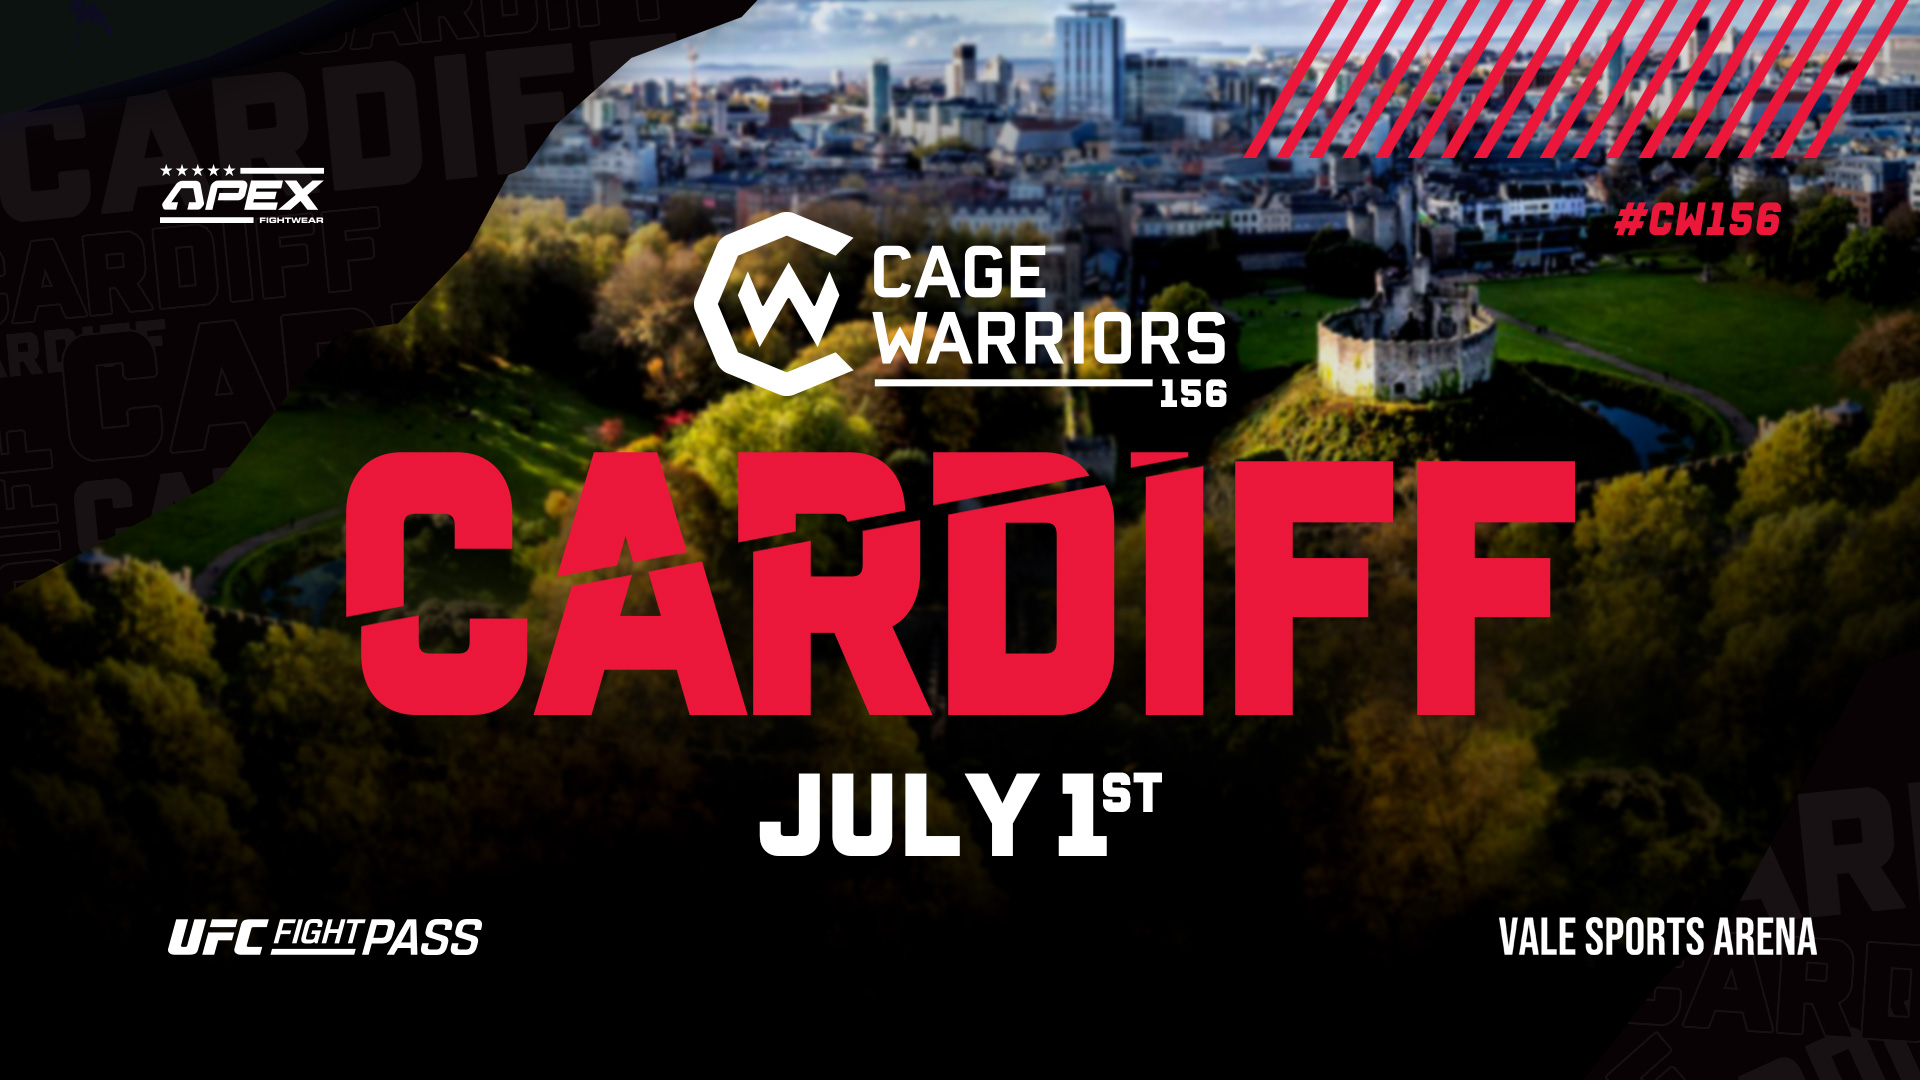 Cage Warriors 156 - Cardiff